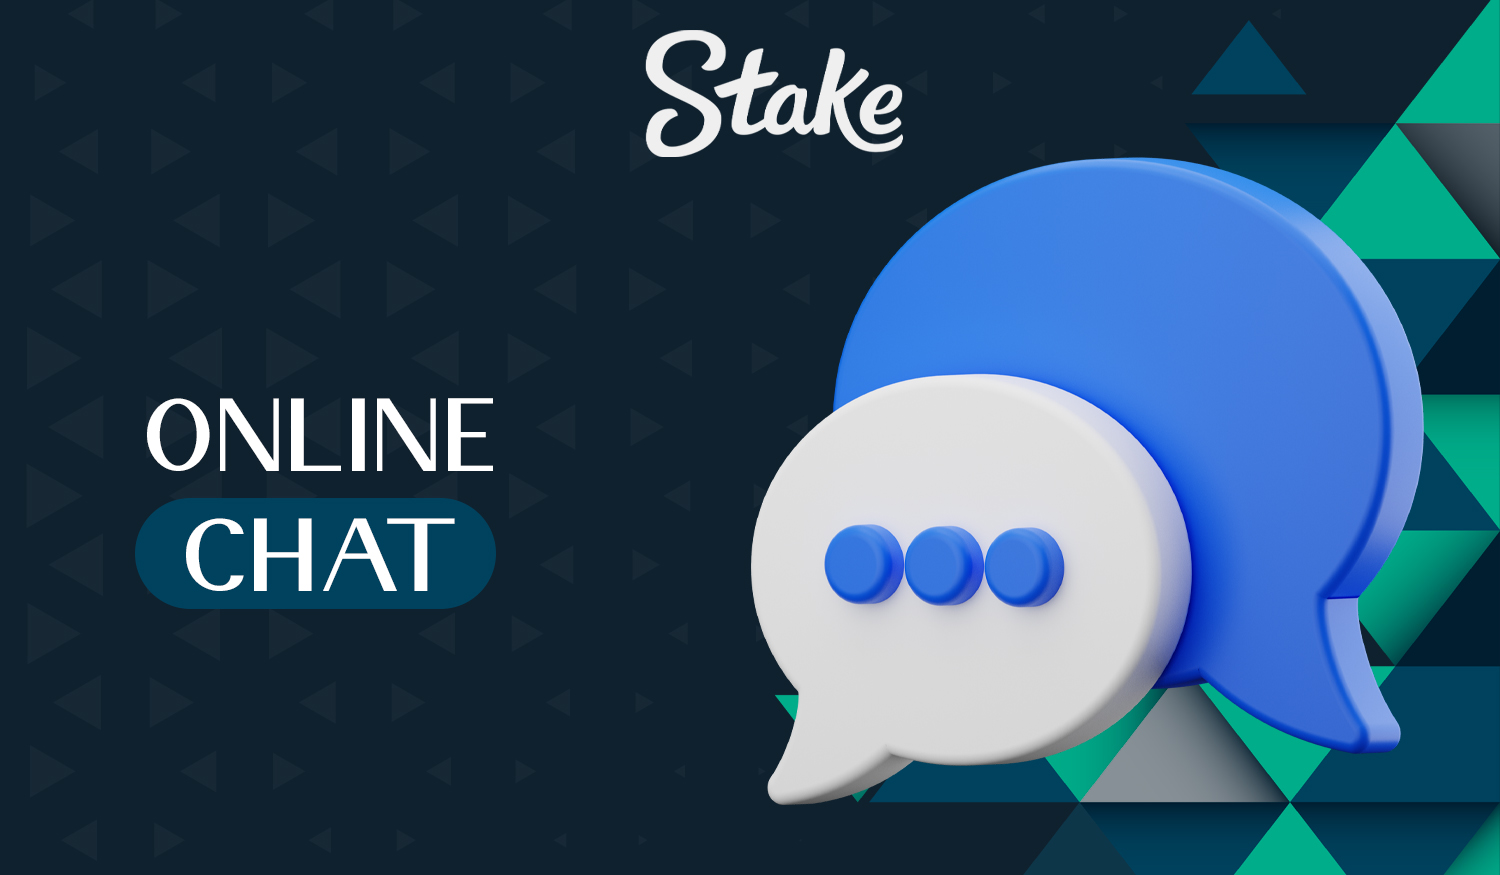 How to contact Stake via Live Chat